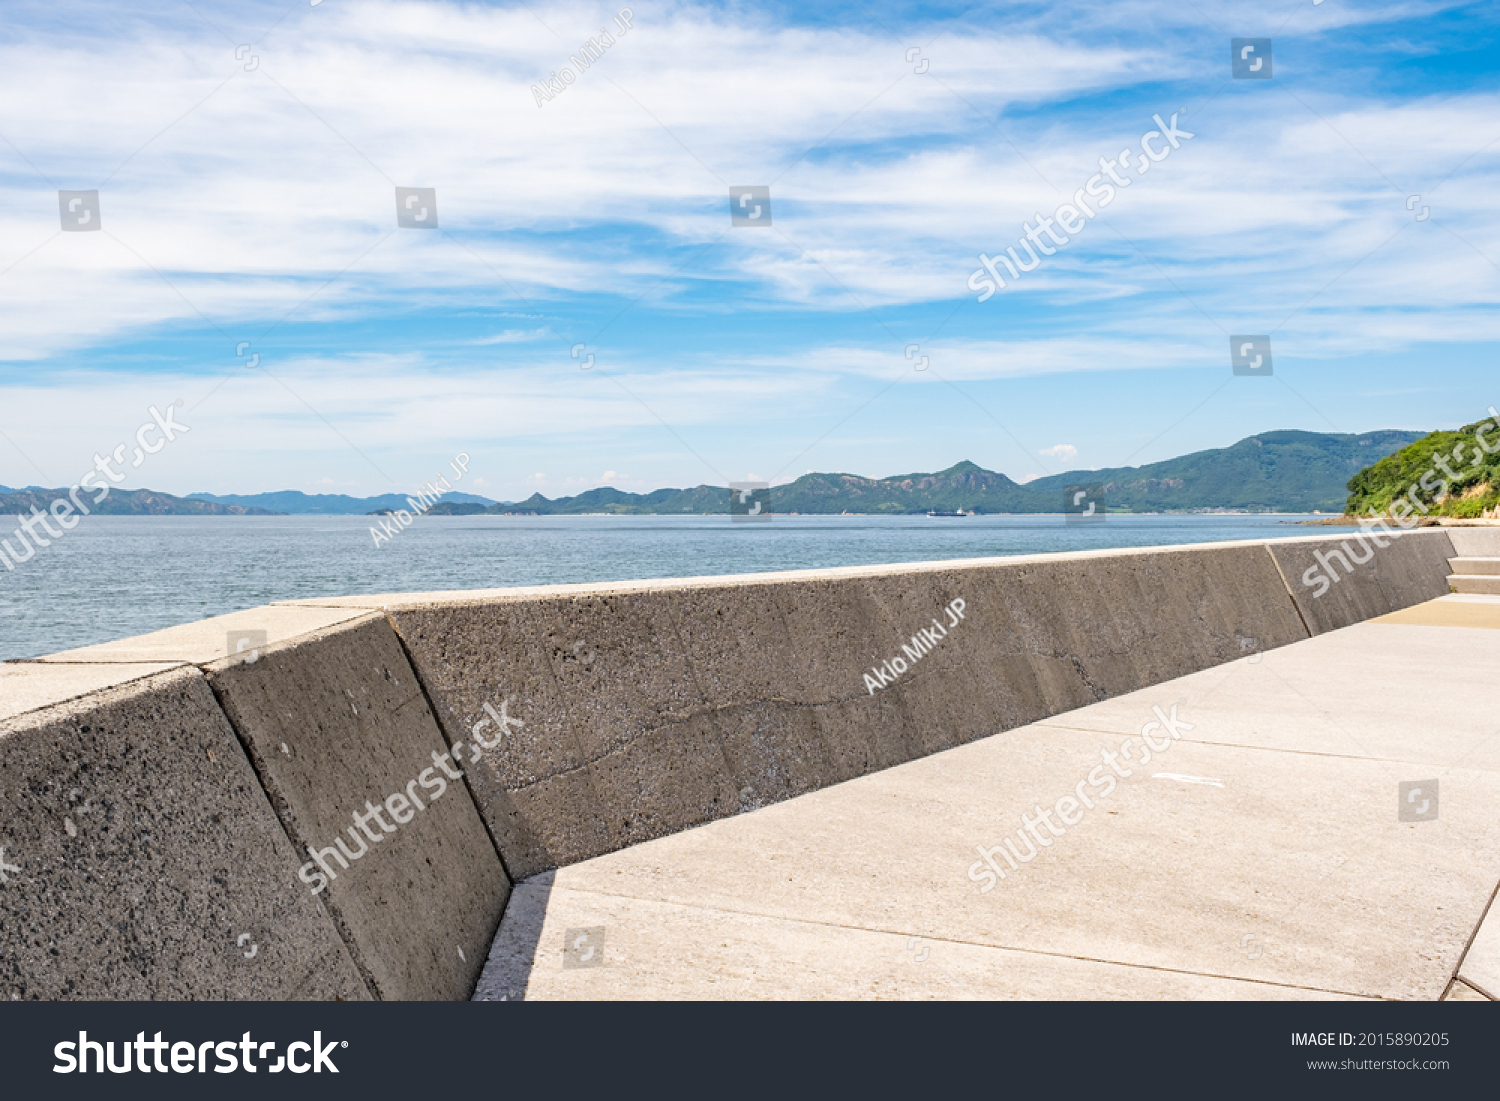 Beautiful Landscape of Seawall or Breakwater in The Blue Sea or Ocean in The Afternoon in Summer, Summer Vacation or Travel Background, Ogijima Island in Kagawa Prefecture in Japan, Nobody #2015890205